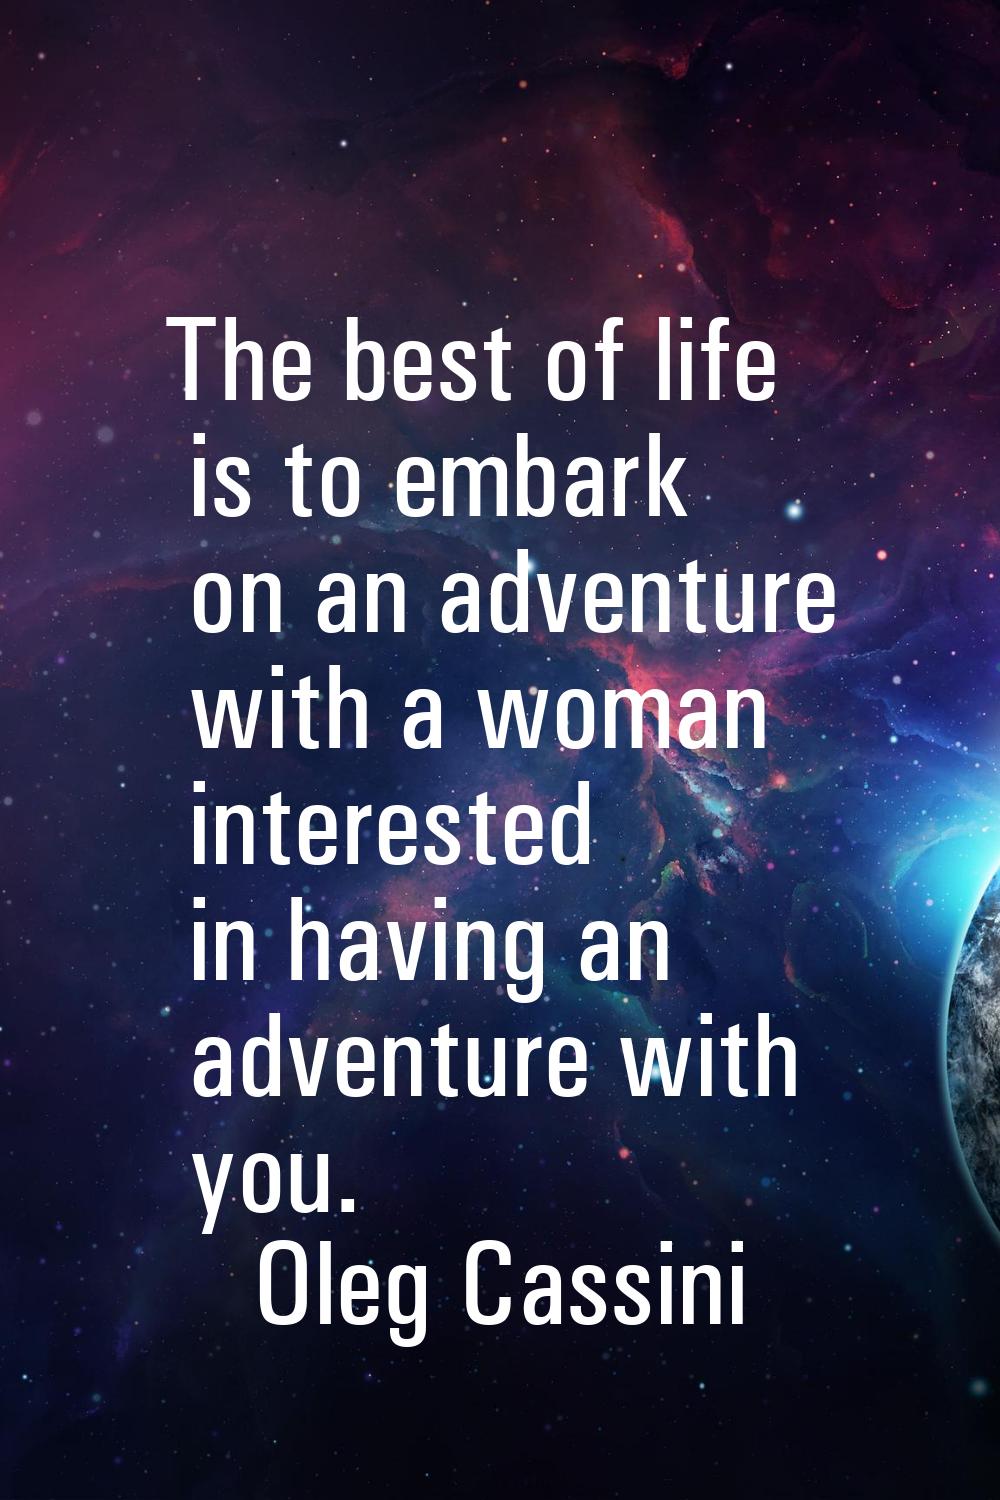 The best of life is to embark on an adventure with a woman interested in having an adventure with y